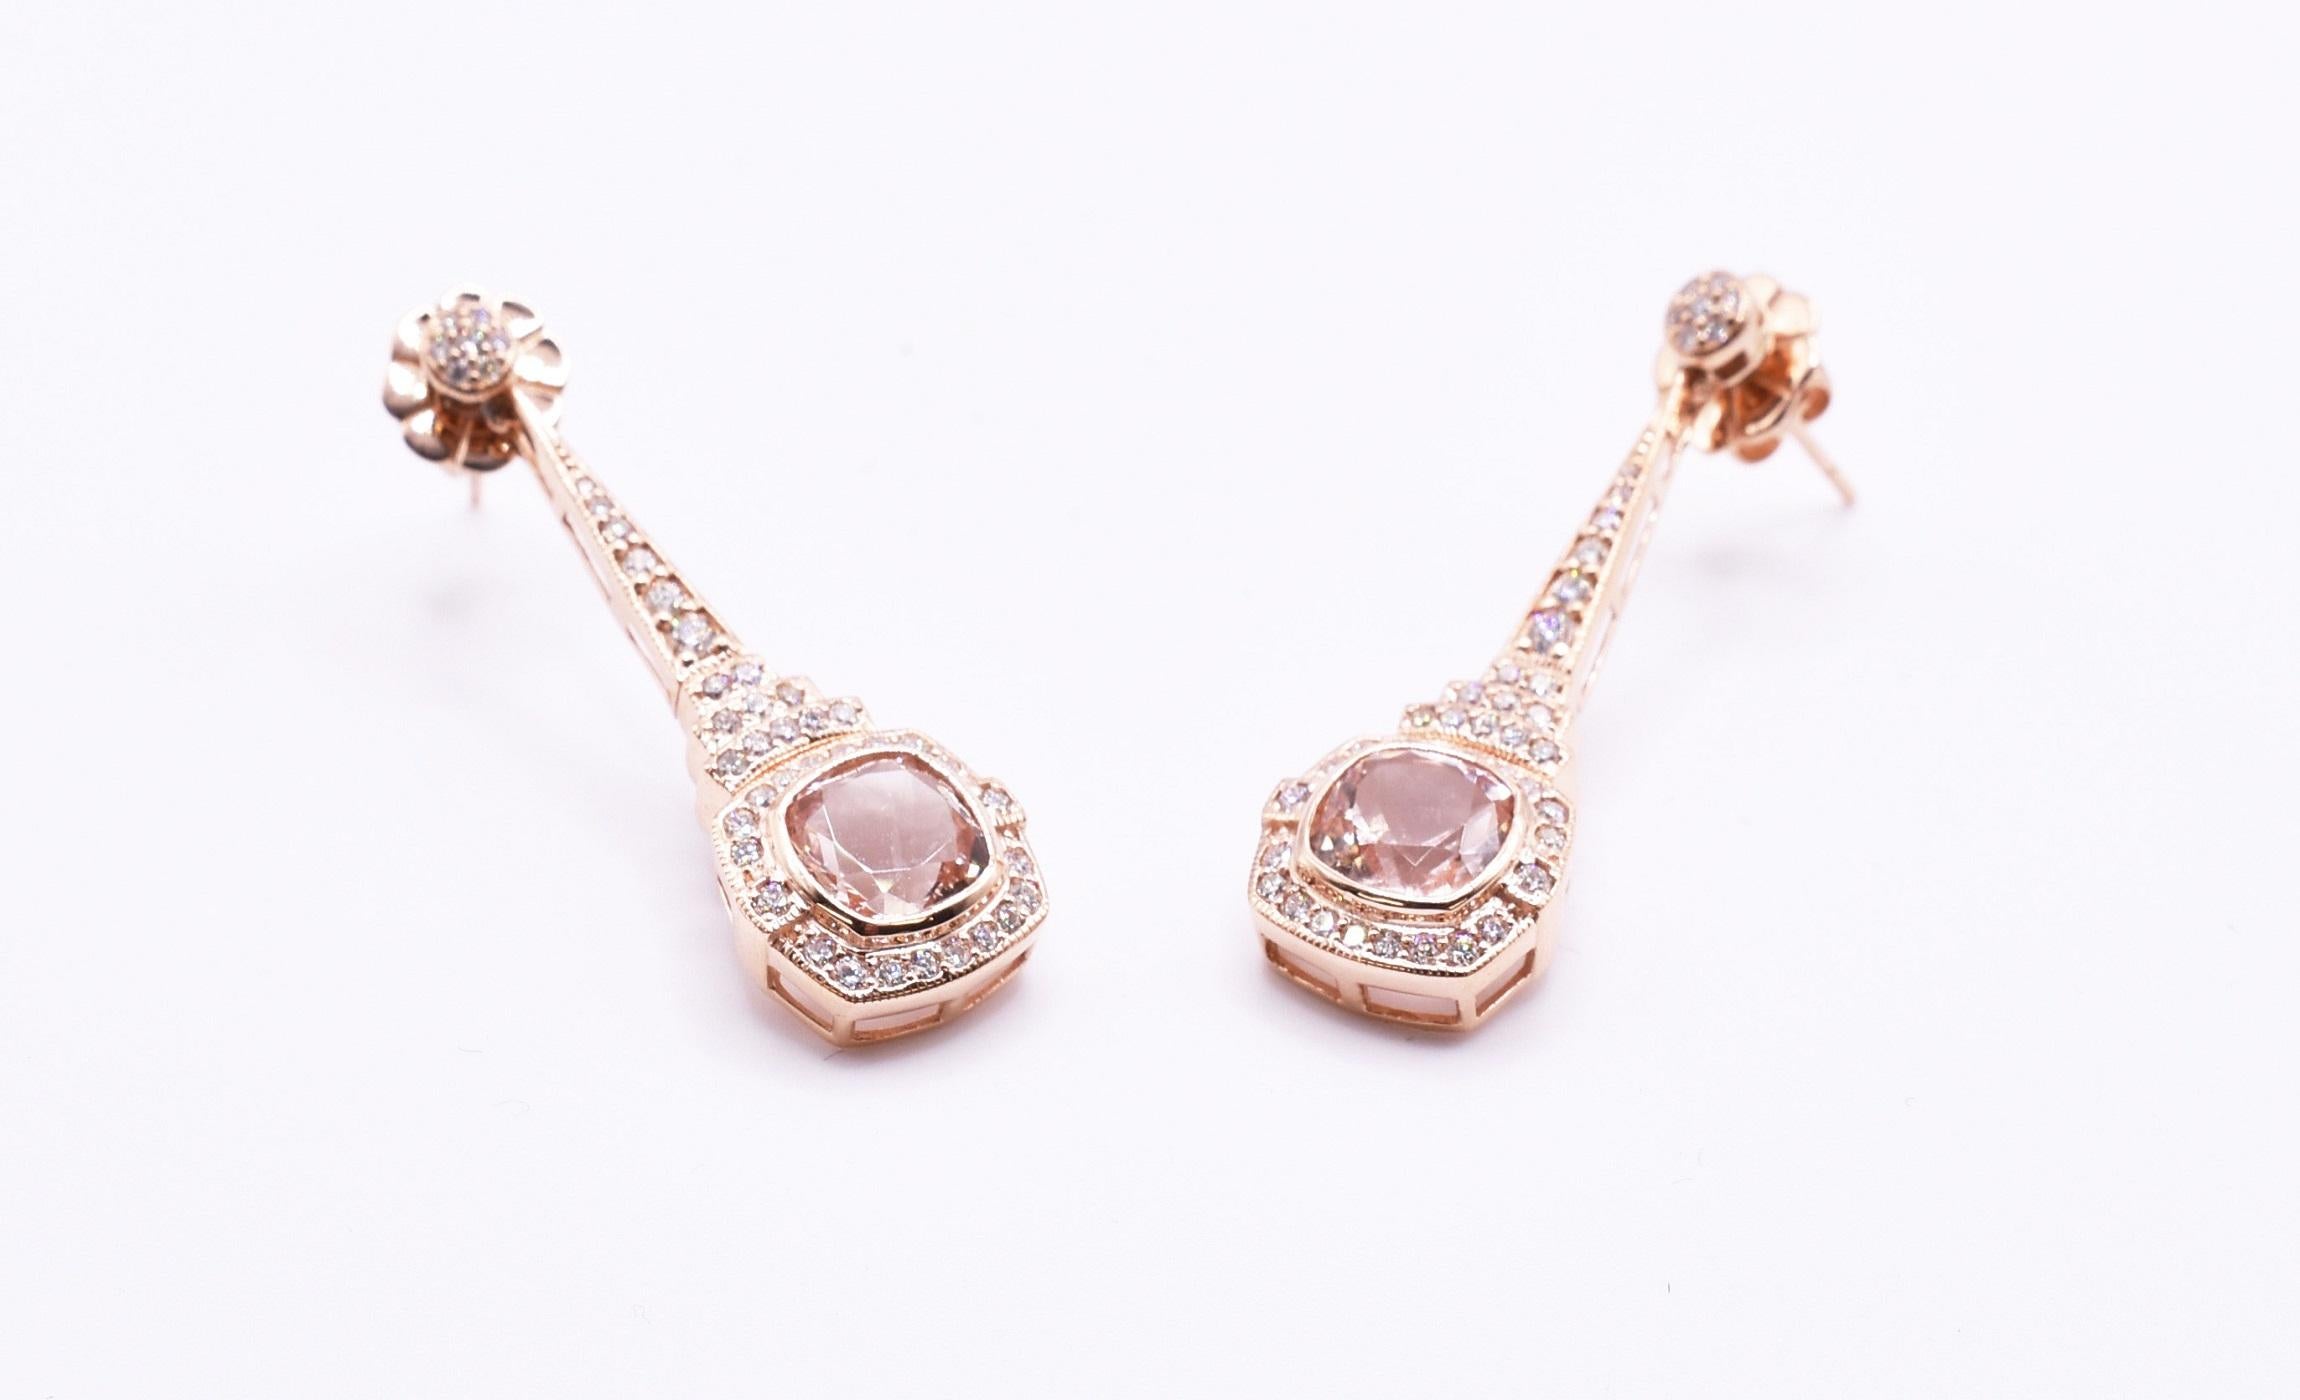 For sale is a lovely pair of Art Deco style 18k rose gold morganite & diamond drop earrings. Featuring a cushion cut morganite to the centre, surrounded by round cut diamonds. Morganite = 3.24ct Diamonds = 0.82ct Gold weight = 9.96g.